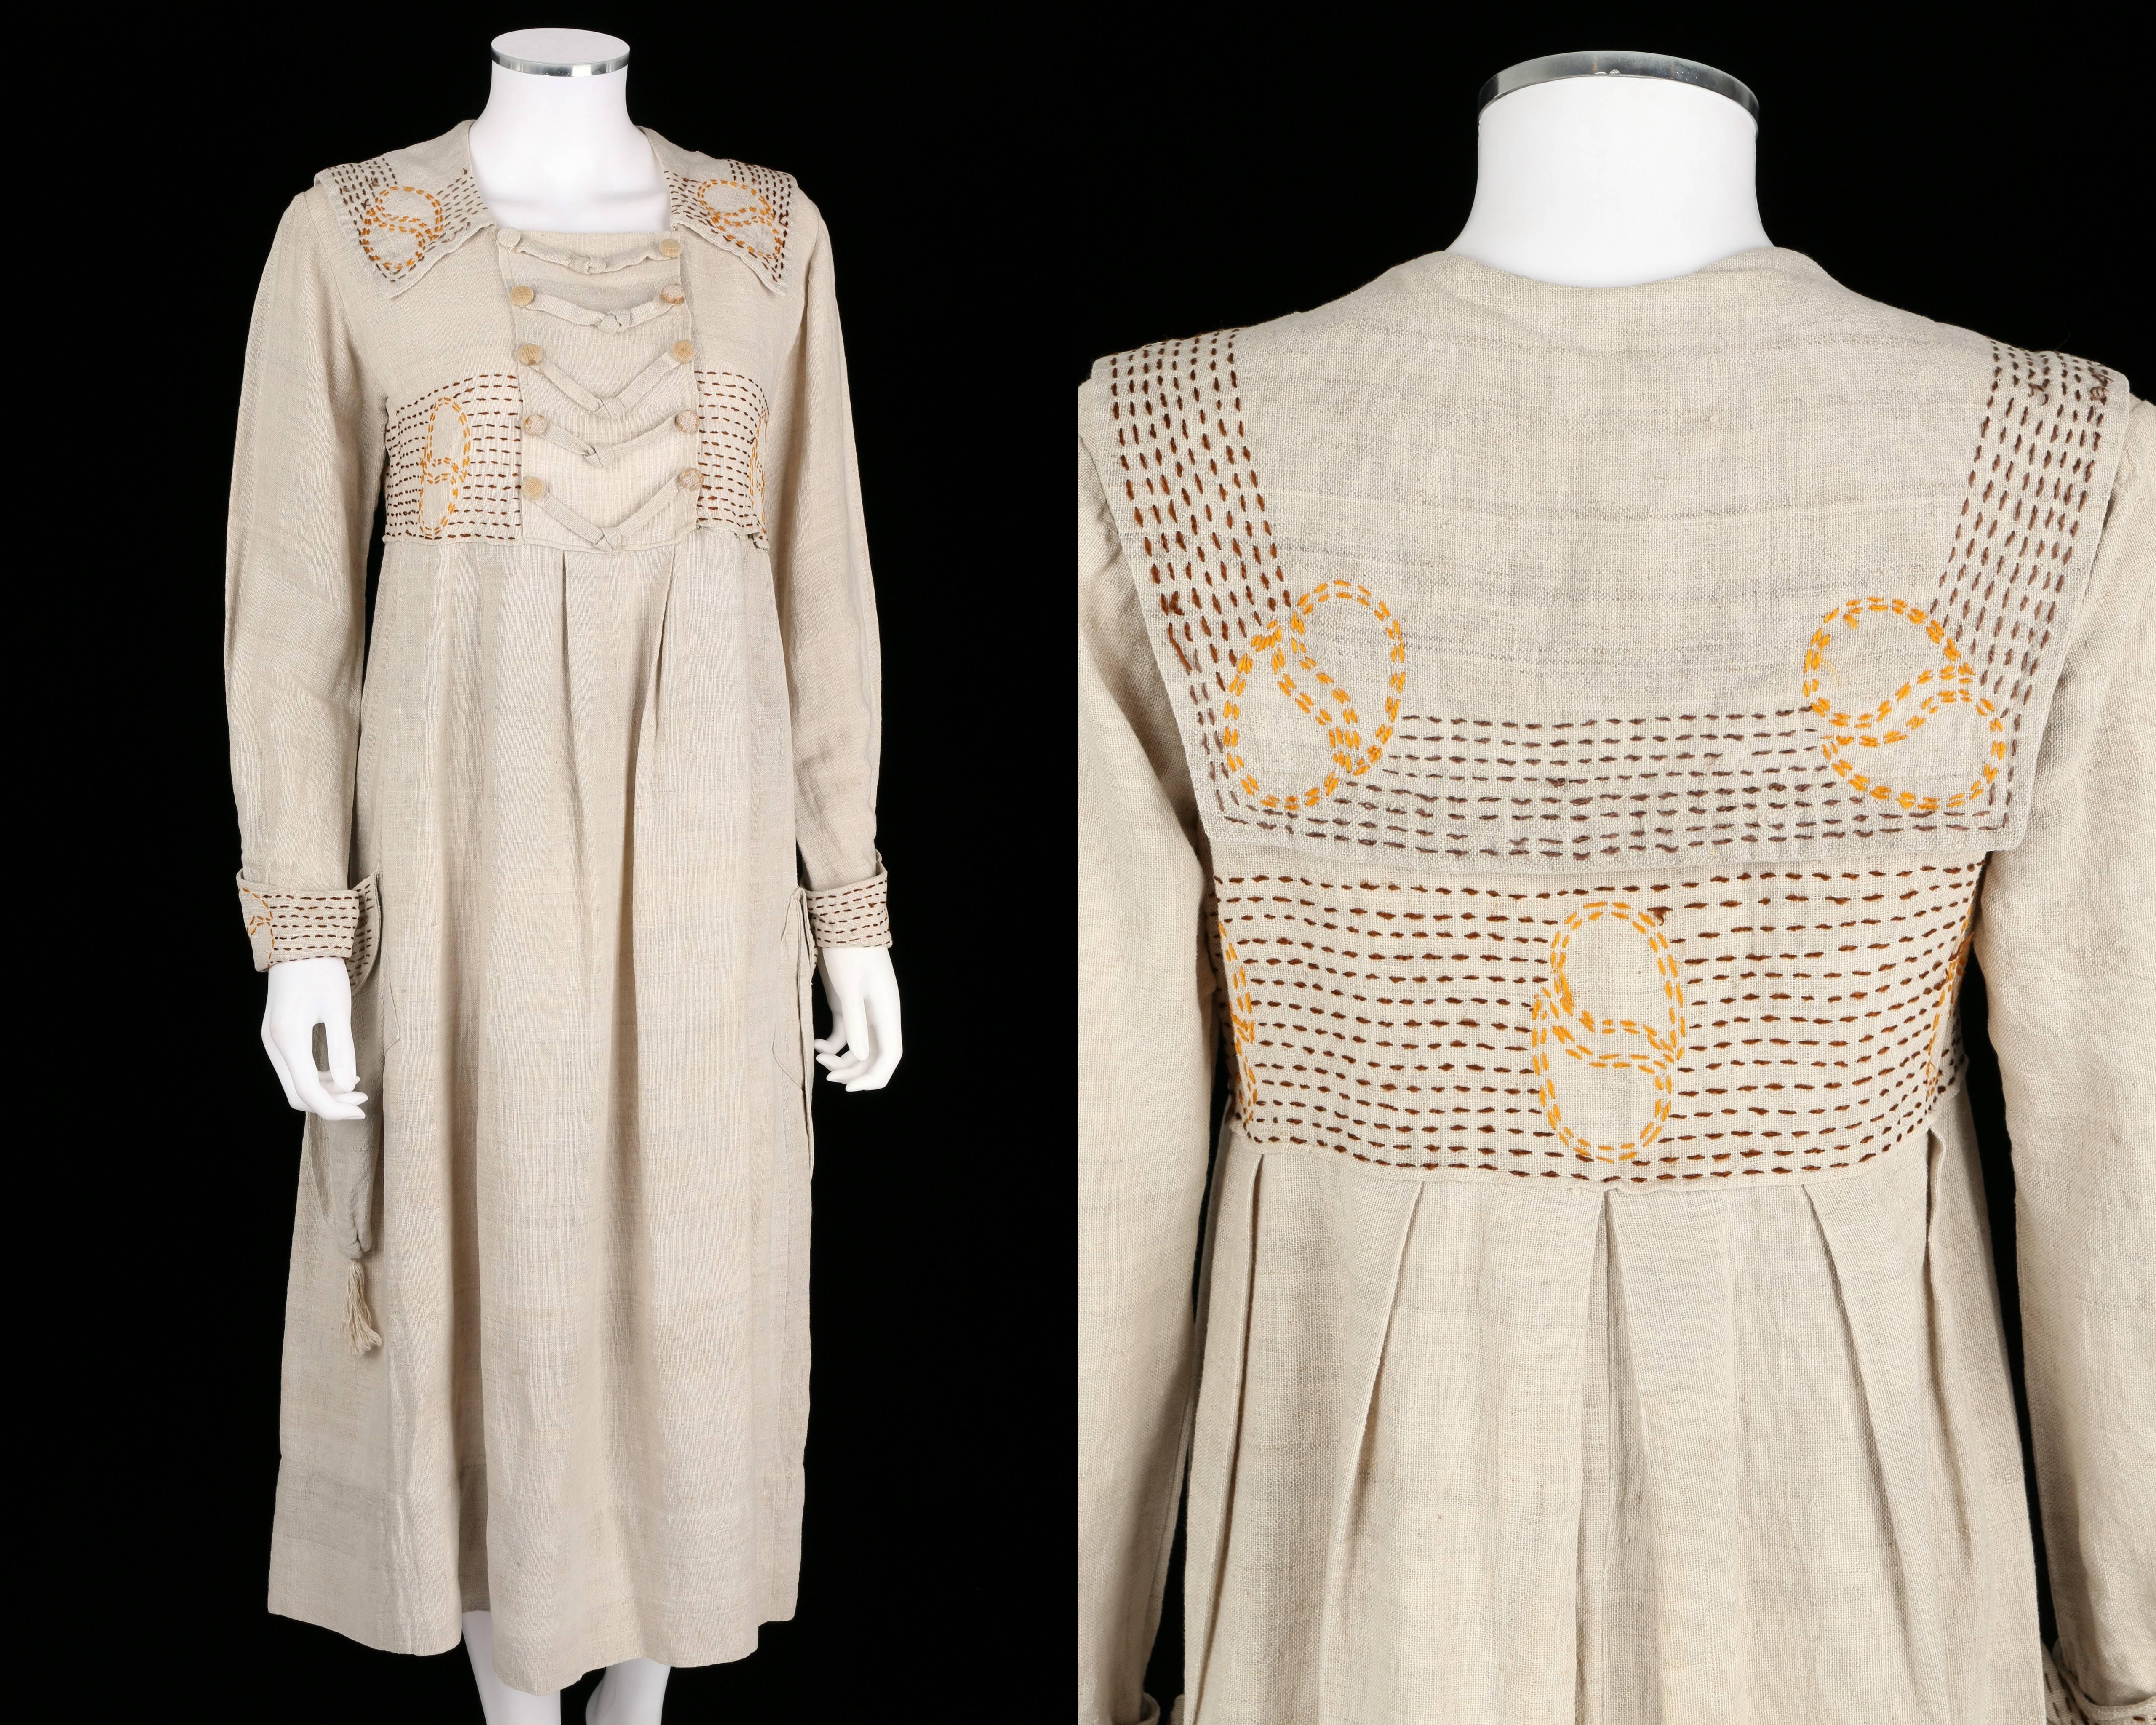 Vintage couture c.1910's natural linen rural smock frock dress. Brown and golden-orange hand embroidery on collar, waist, and cuffs. Two pockets with tassel trim. Front of dress closes with hooks and eyes at bust. Large embroidered sailor collar.